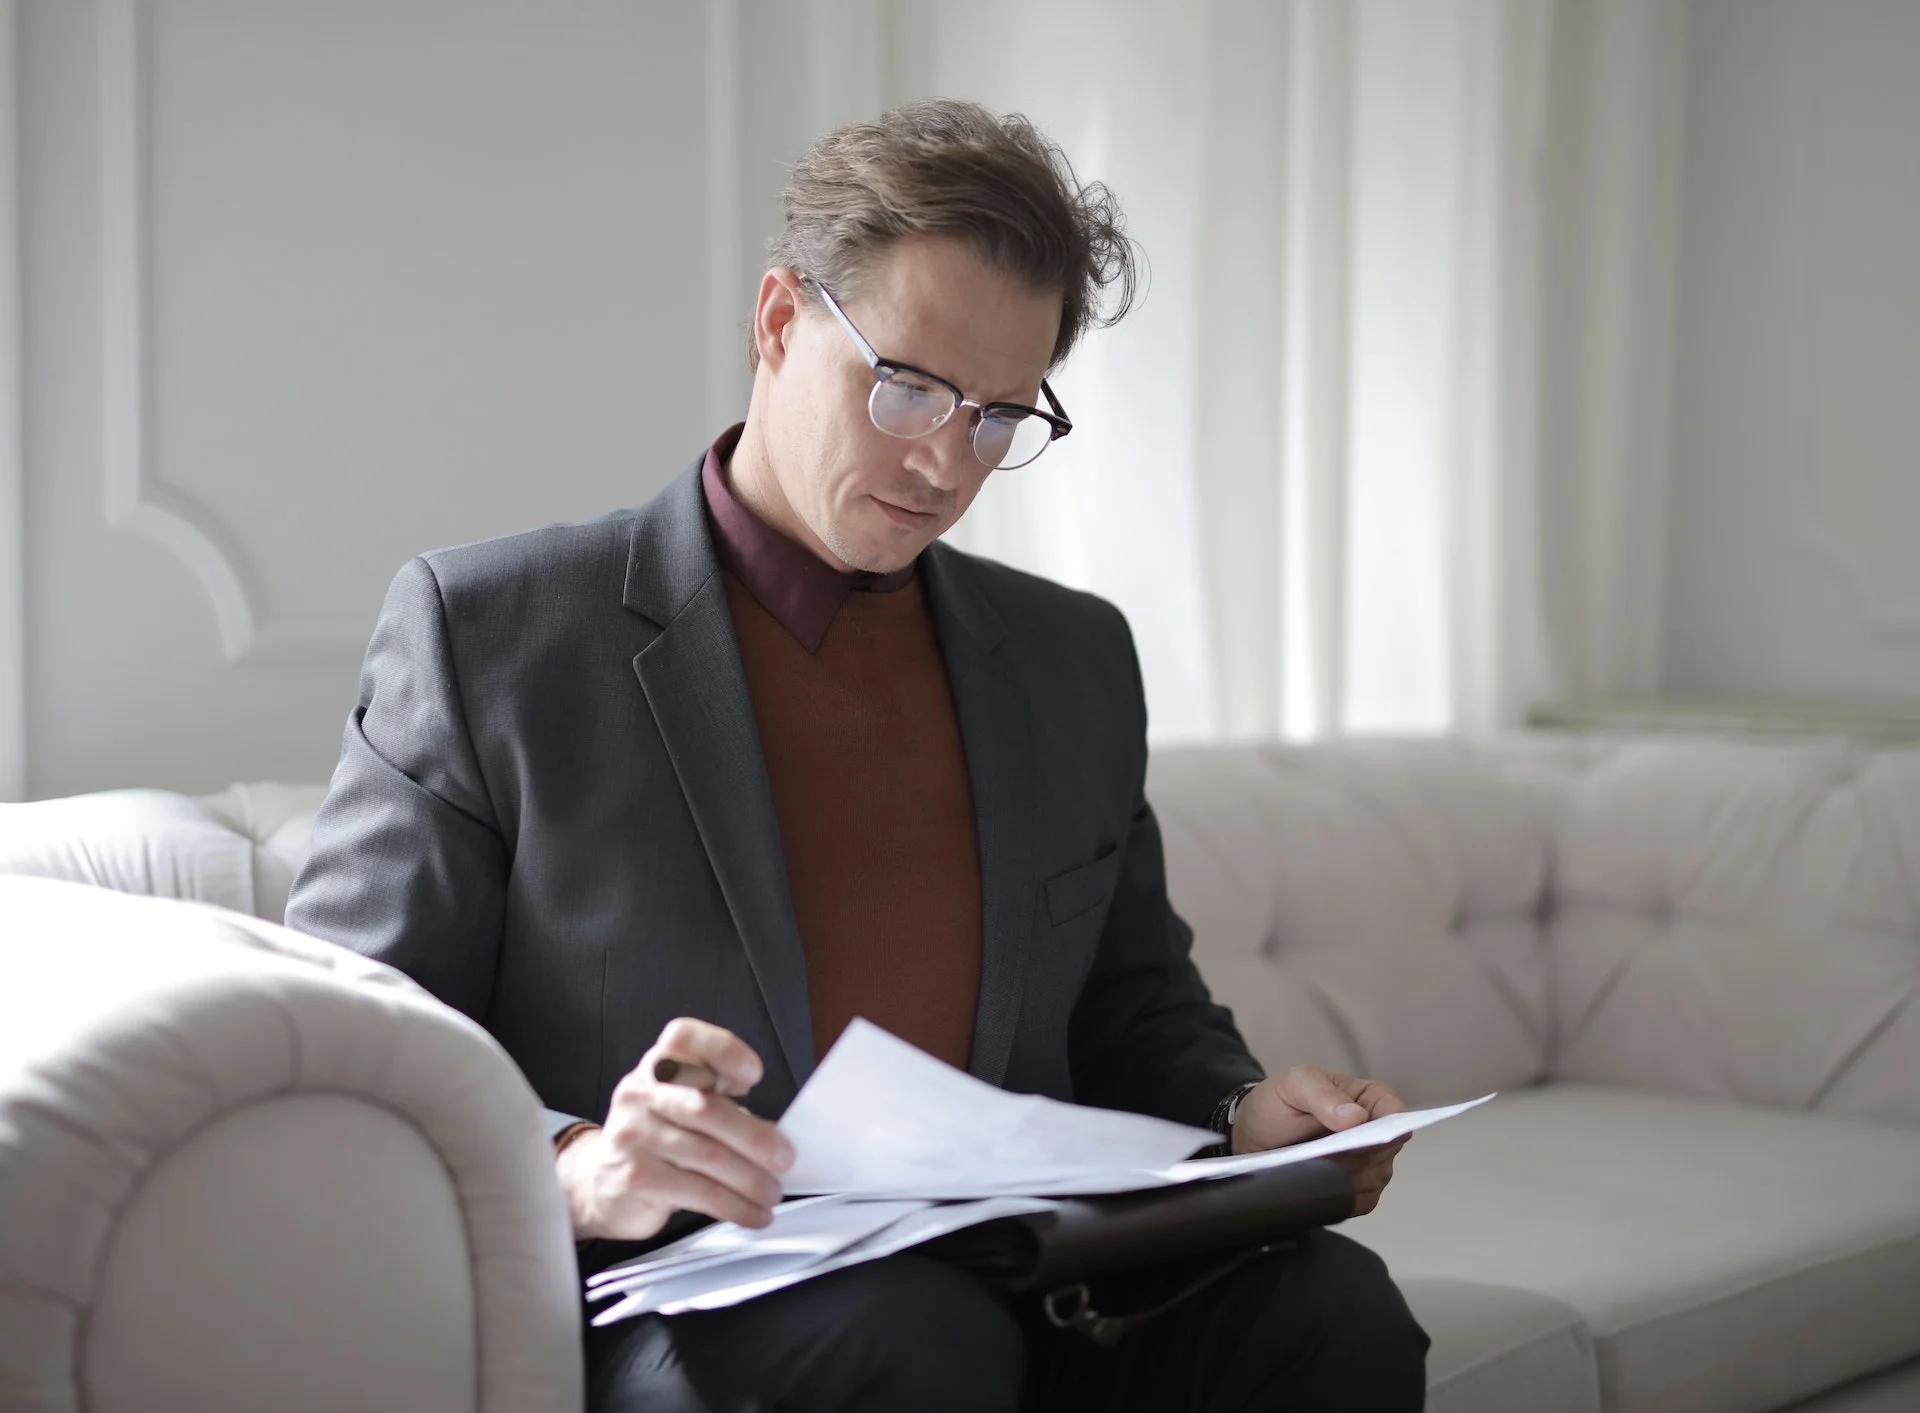 A professional man with glasses, wearing a dark blazer and turtleneck, focused on reviewing papers in his hand in a well-lit room.